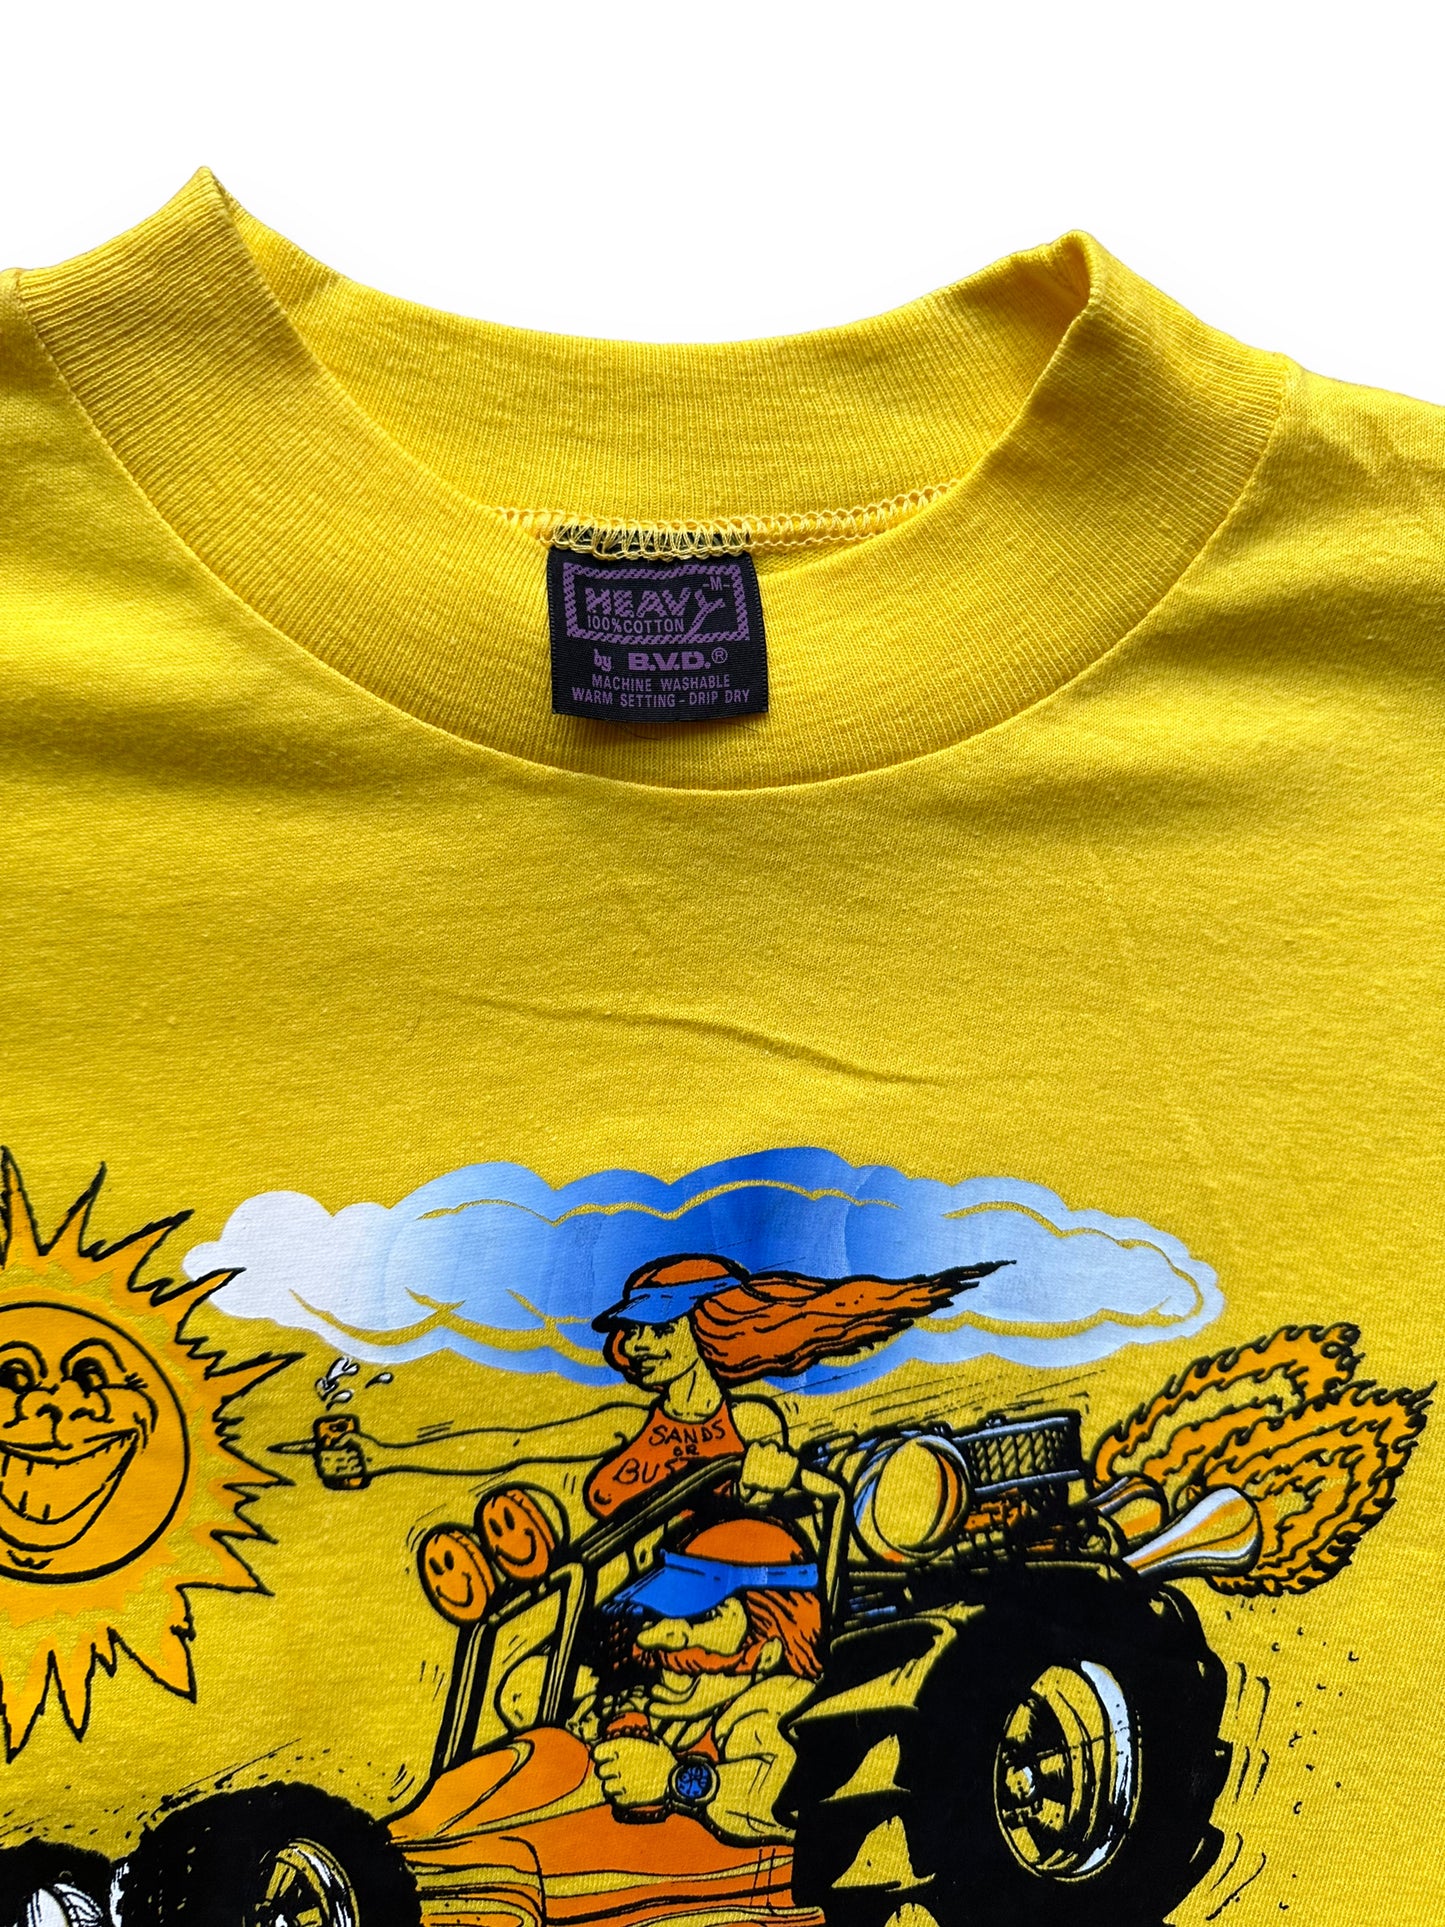 Tag View of Vintage Dune Buggy Graphic Tee SZ L | Vintage Bull Shirt Graphic T-Shirts Seattle | Barn Owl Vintage Tees Seattle